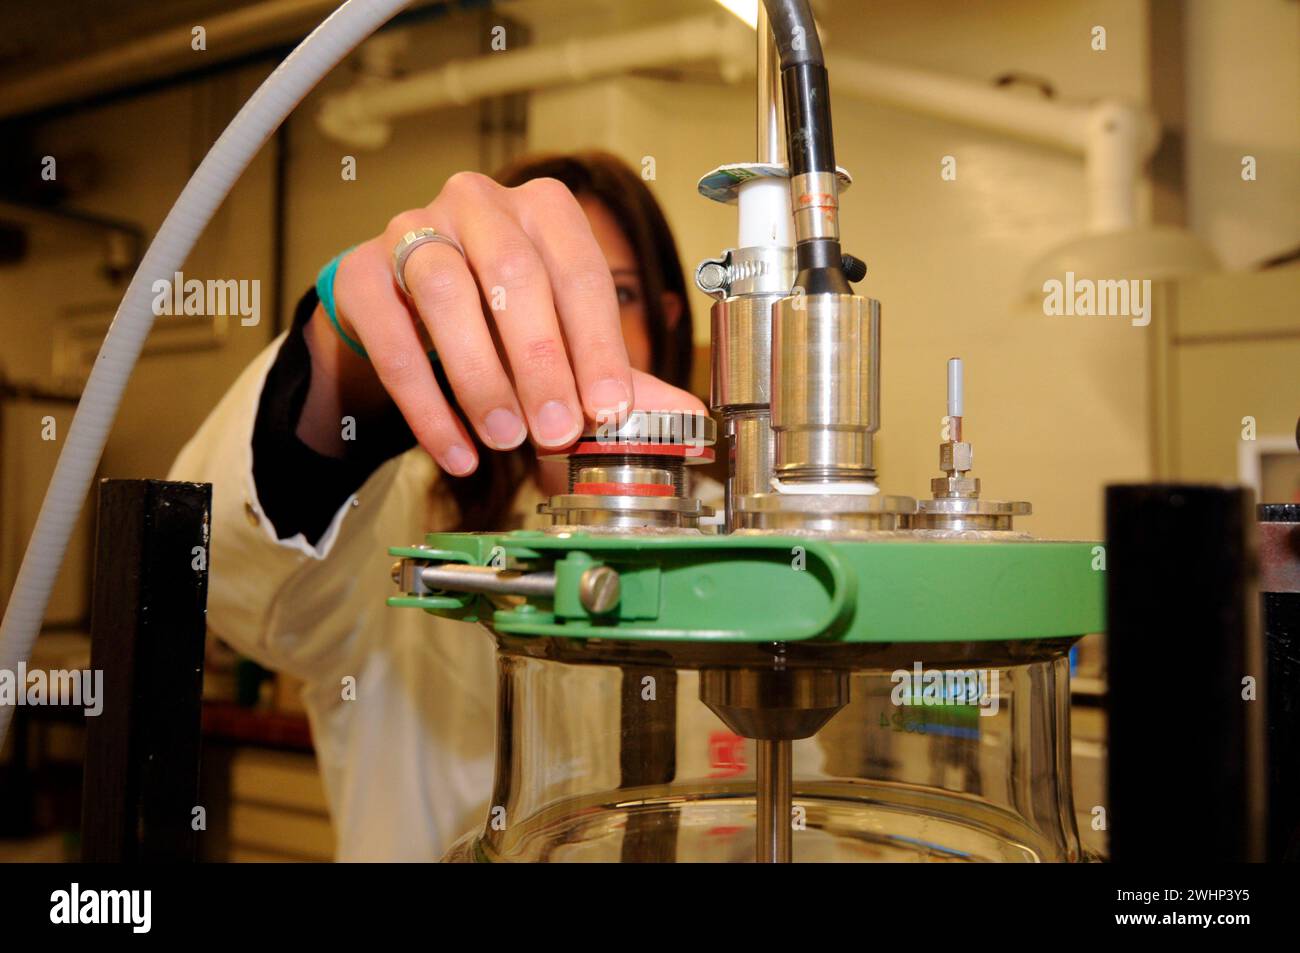 Working in a chemical laboratory Stock Photo